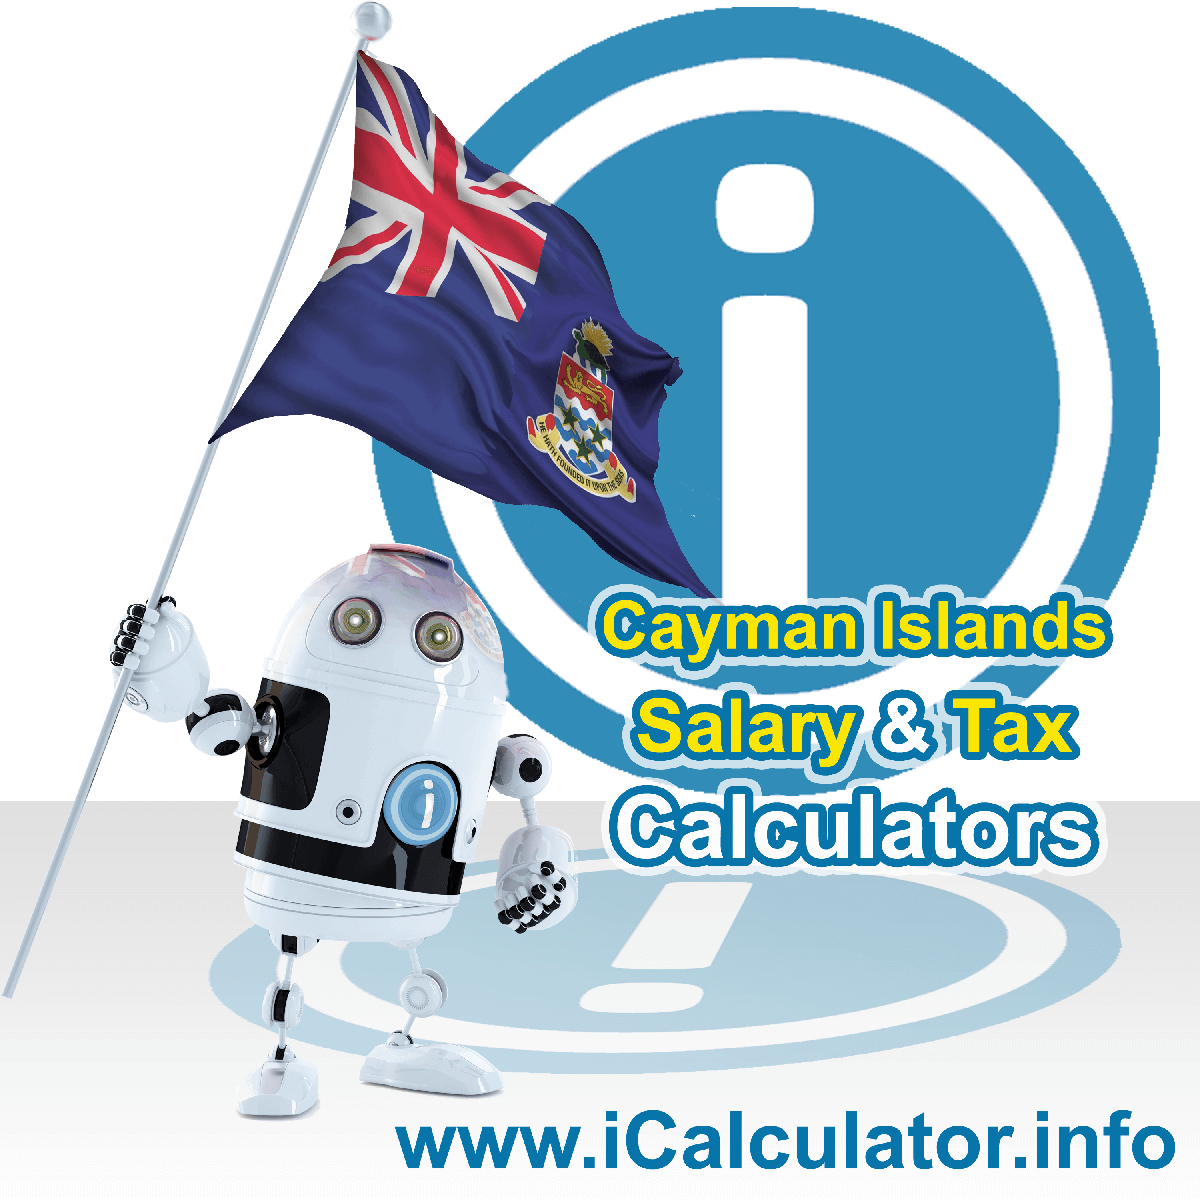 Cayman Islands Wage Calculator. This image shows the Cayman Islands flag and information relating to the tax formula for the Cayman Islands Tax Calculator